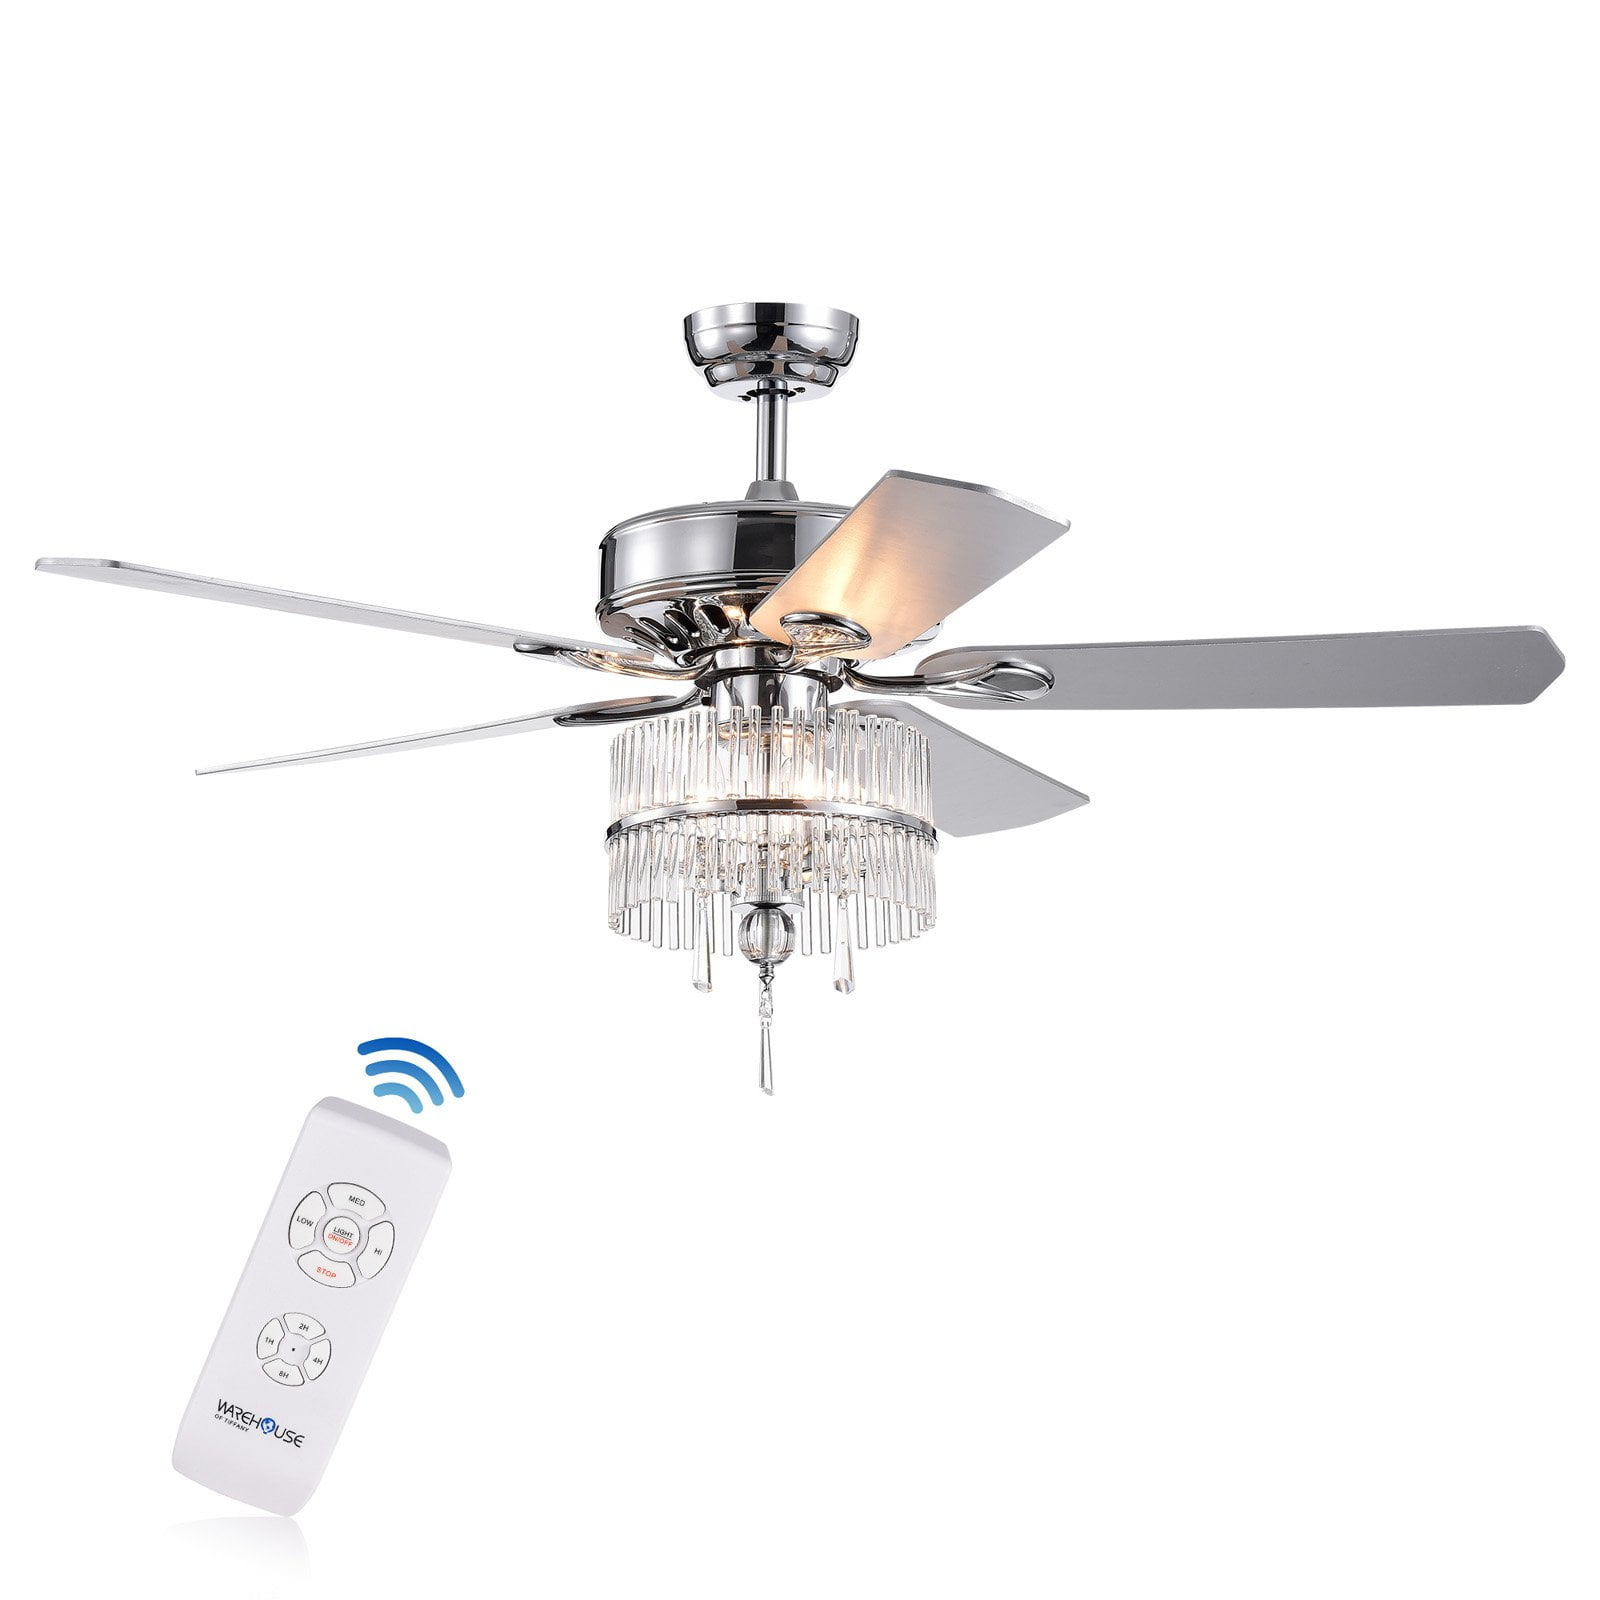 Wyllow DeBase 52-Inch 5-Blade Chrome Lighted Ceiling Fans with Crystal Flutes Shade (Remote Controlled & 2 Color Option Blades)